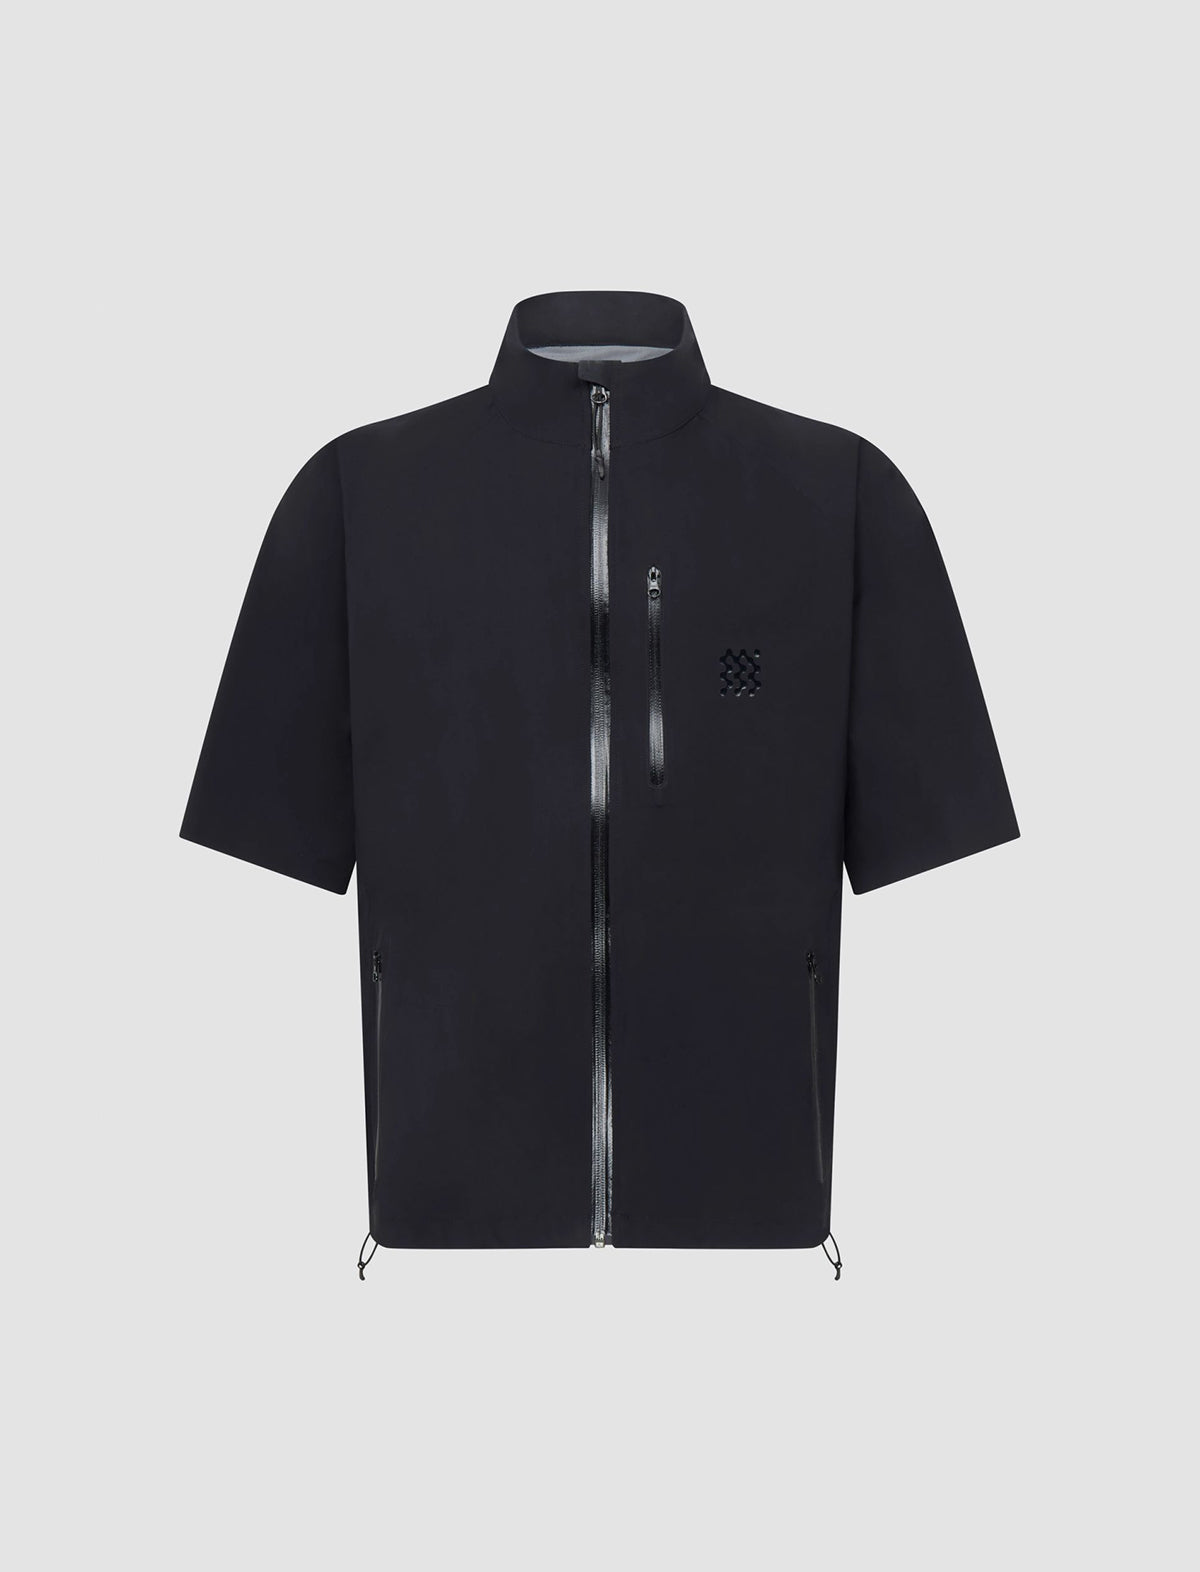 MANORS GOLF 2.5L Breathable Waterproof Shirt in Black